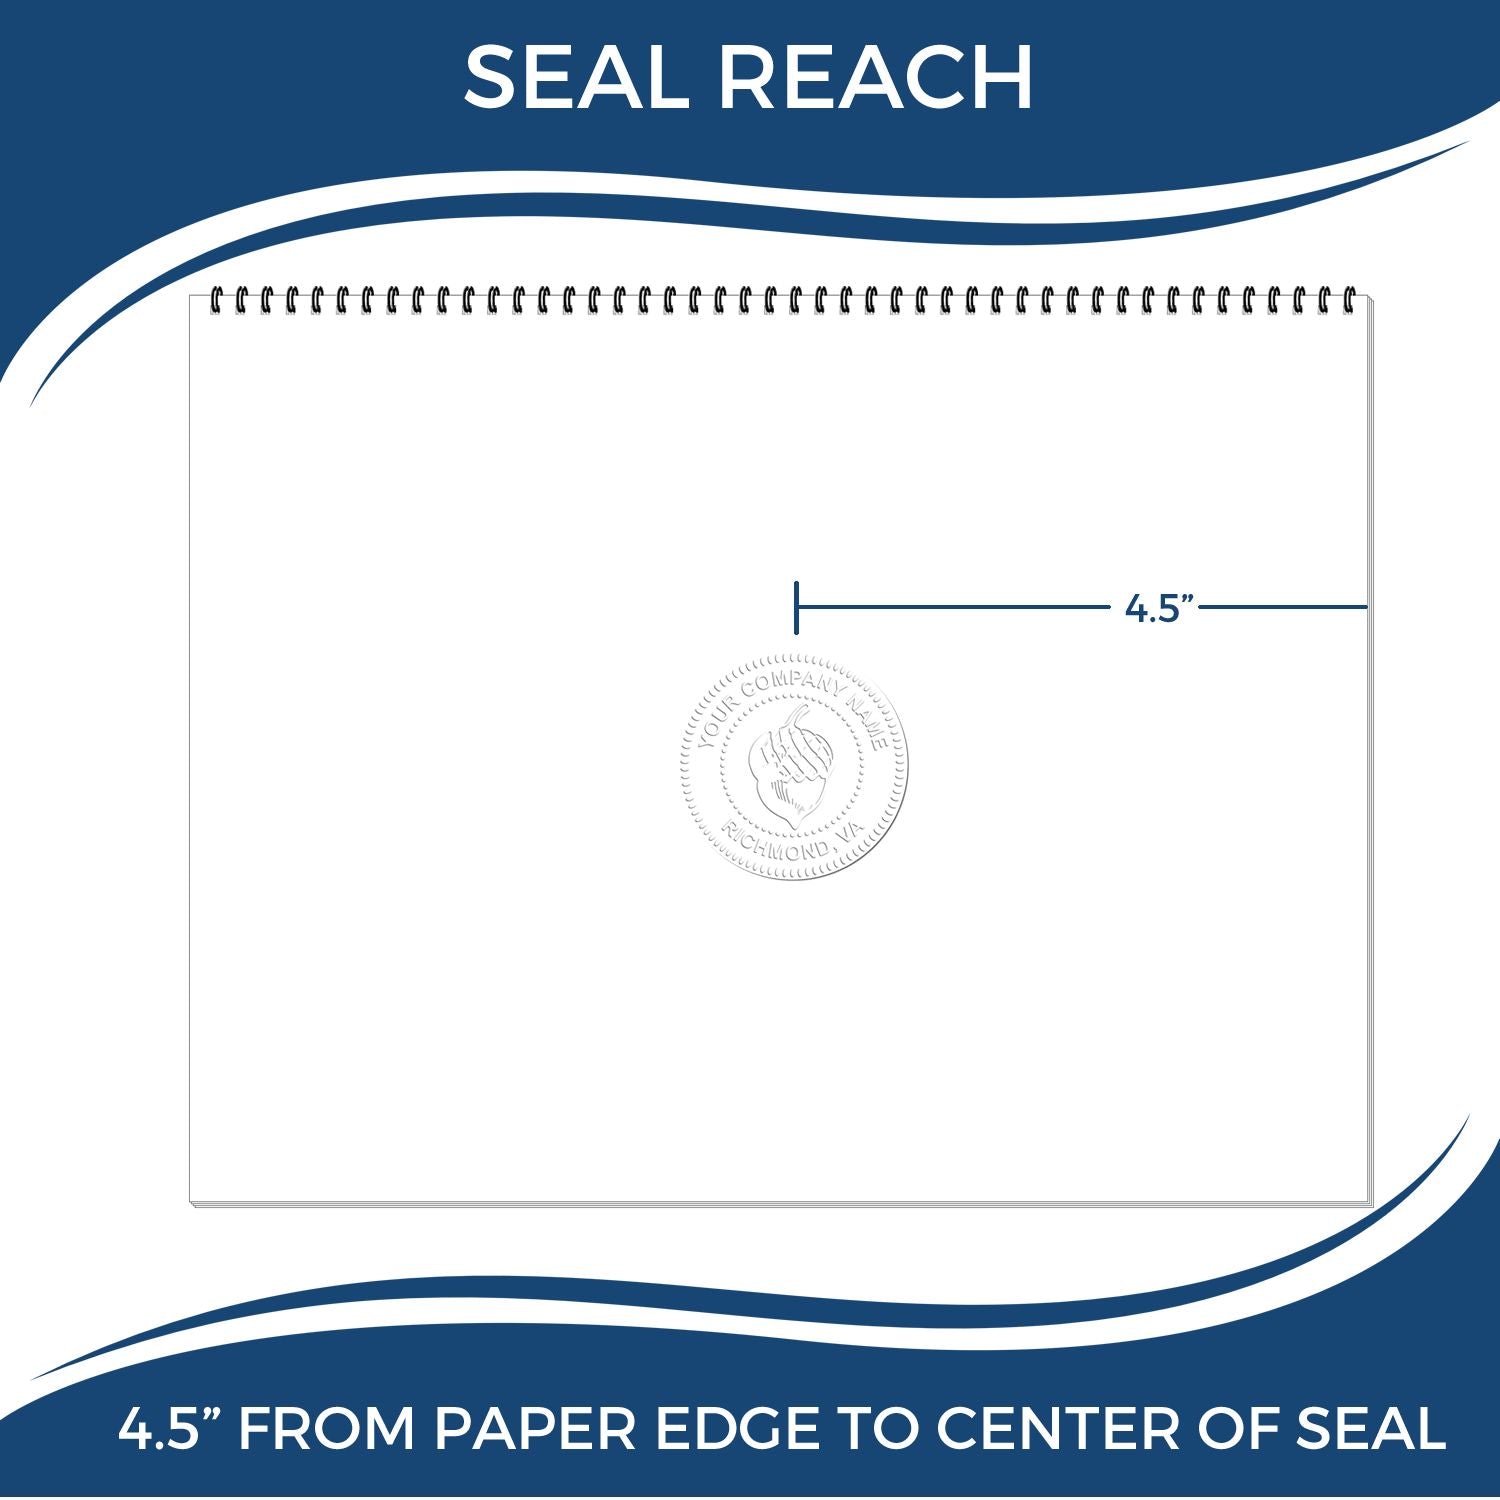 An infographic showing the seal reach which is represented by a ruler and a miniature seal image of the Extended Long Reach Florida Surveyor Embosser